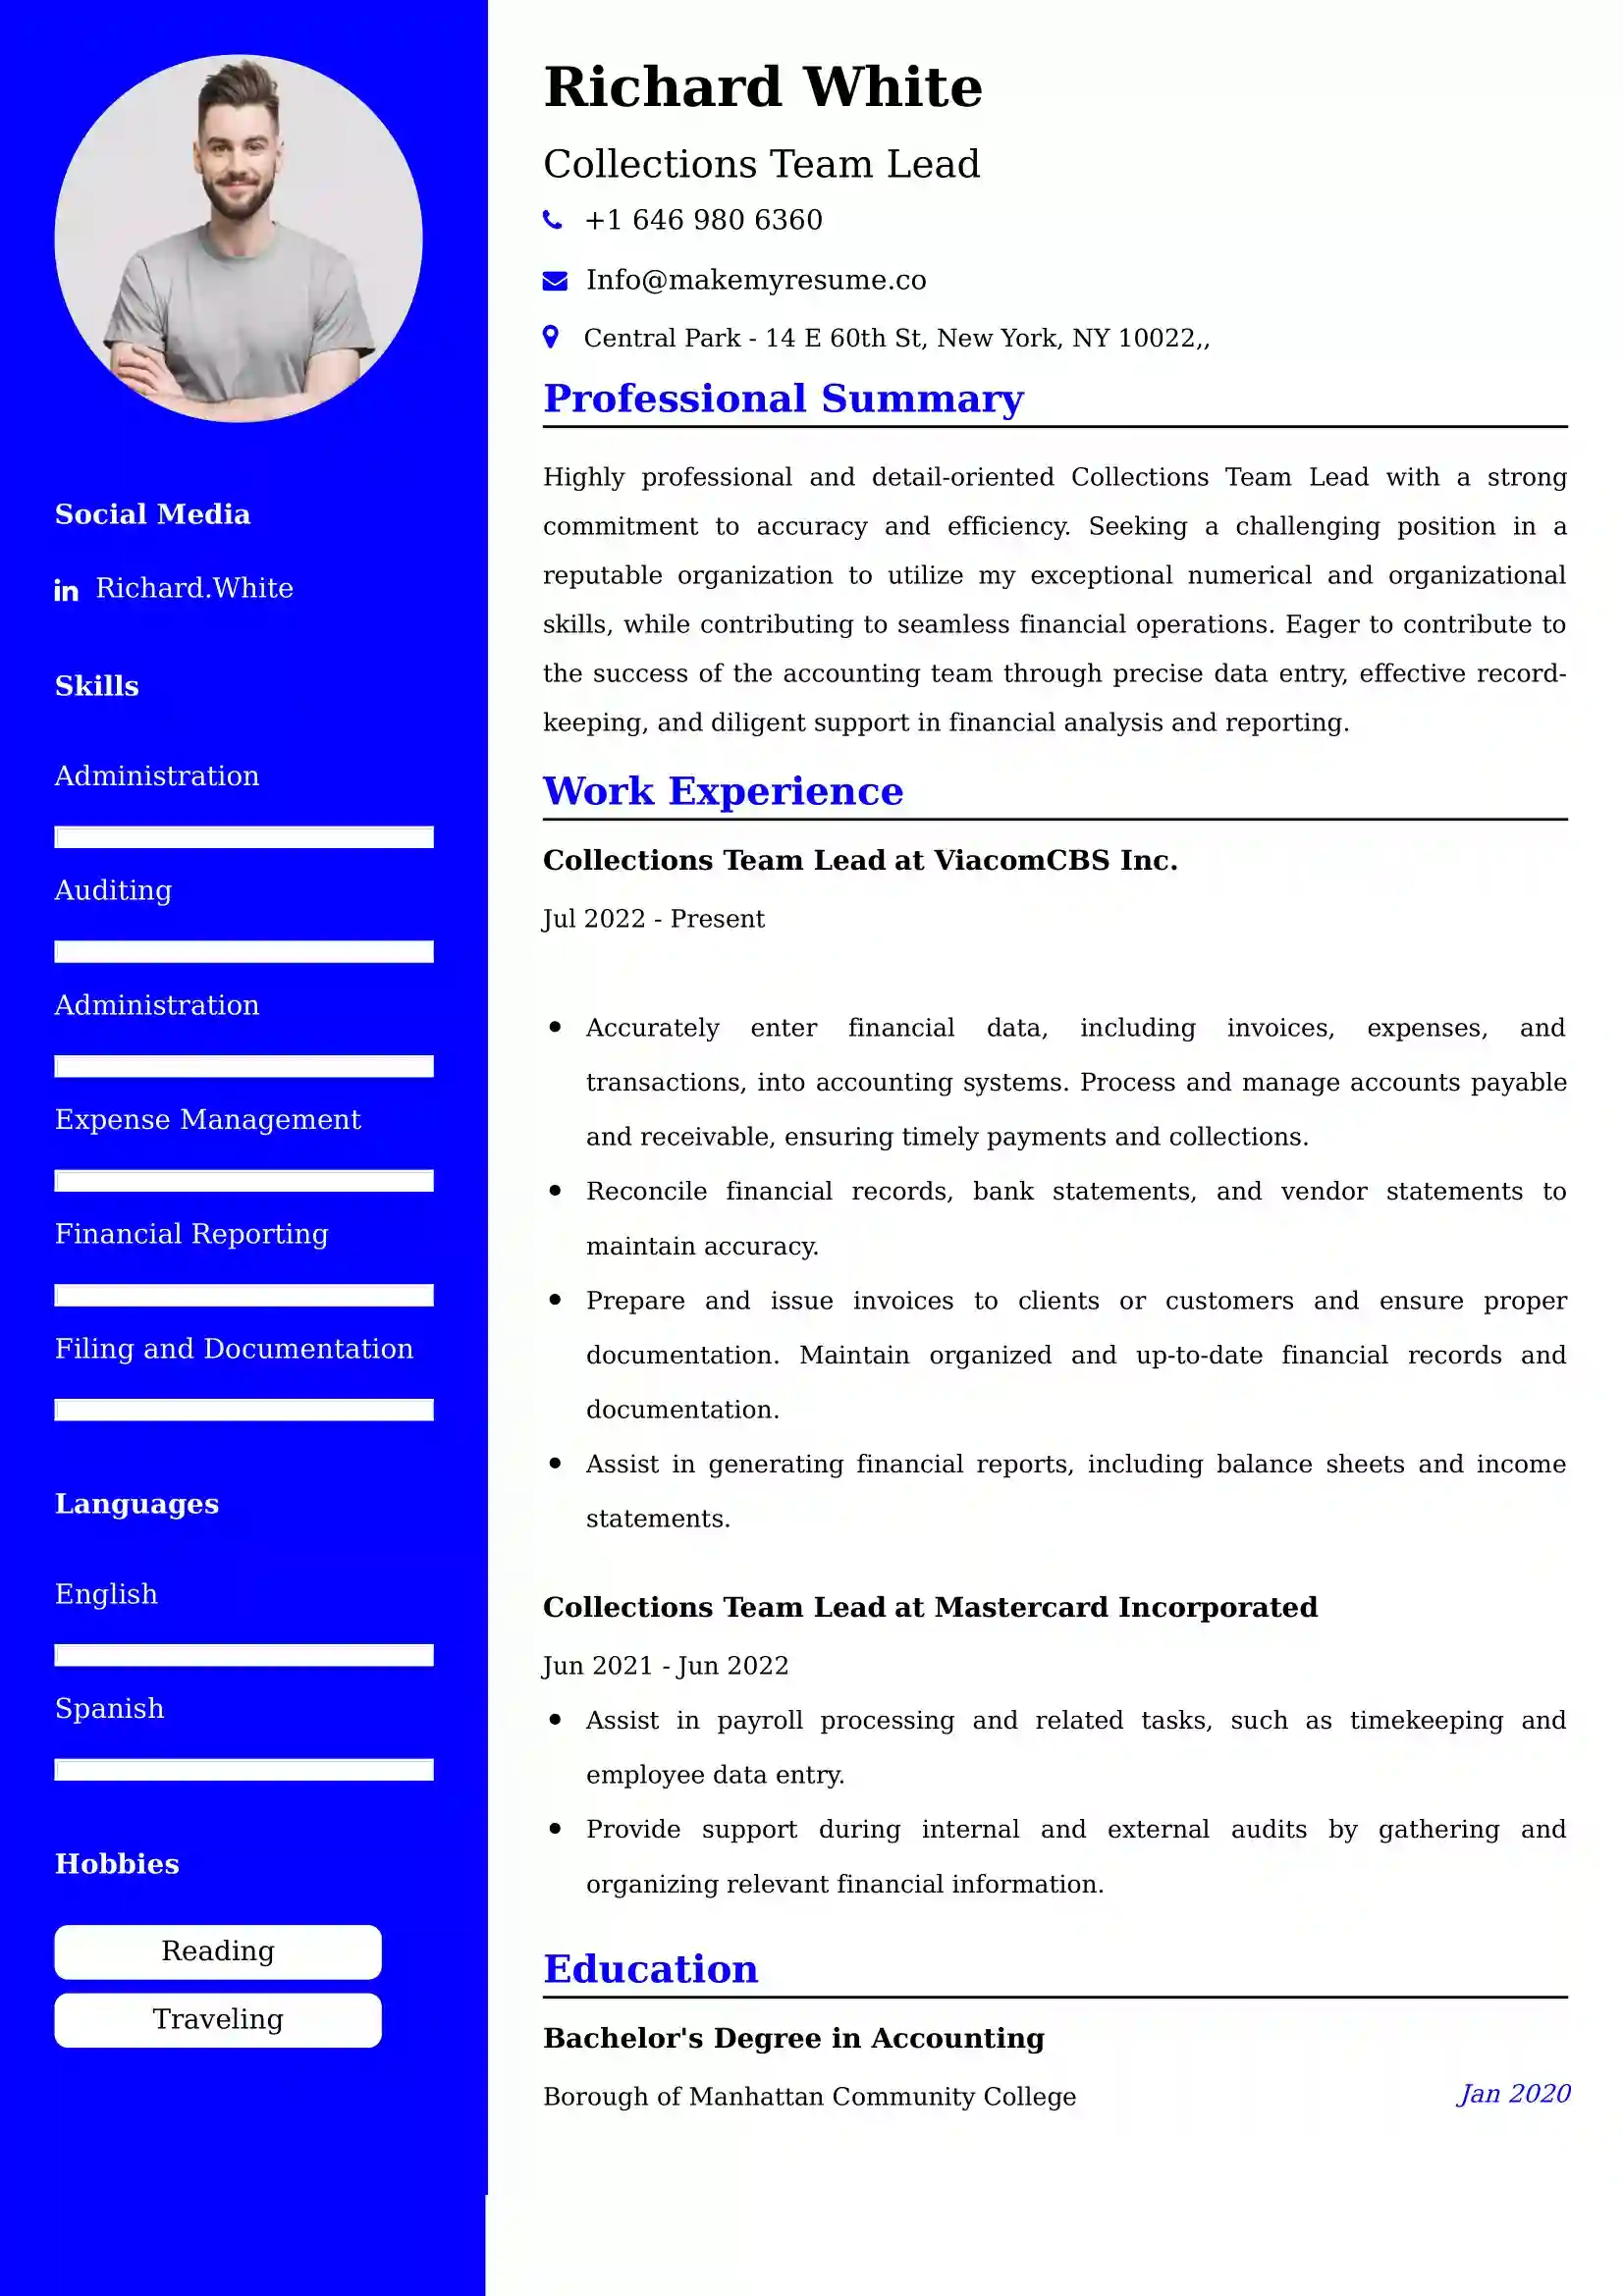 Collections Team Lead Resume Examples - Brazilian Format, Latest Template